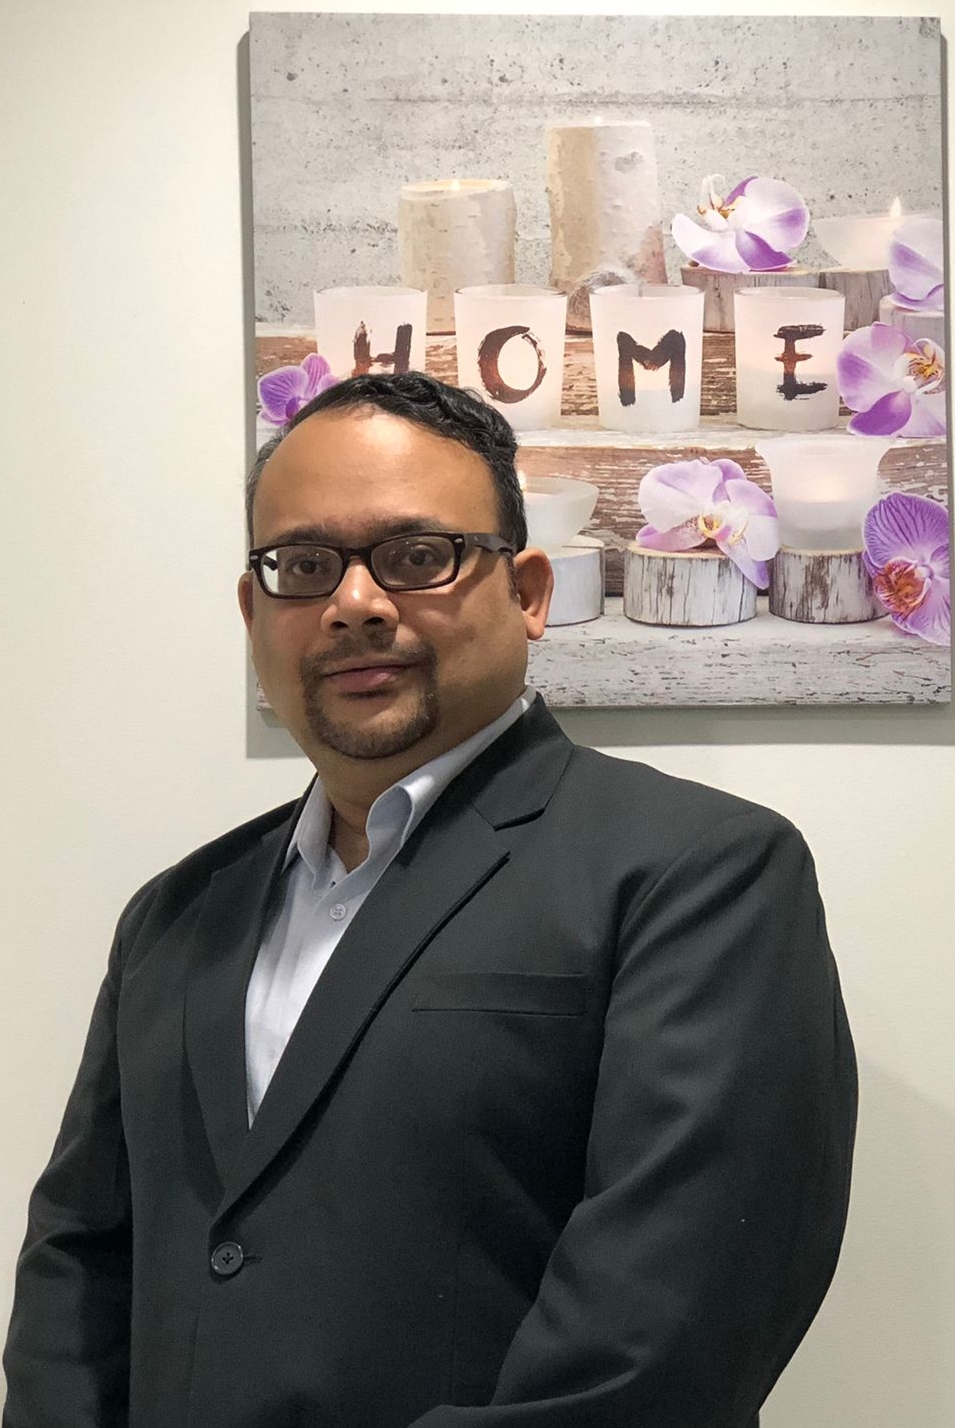 Lohit Joshi- Finance Specialist | 34 Herford St, Ropes Crossing NSW 2760, Australia | Phone: 0435 742 087